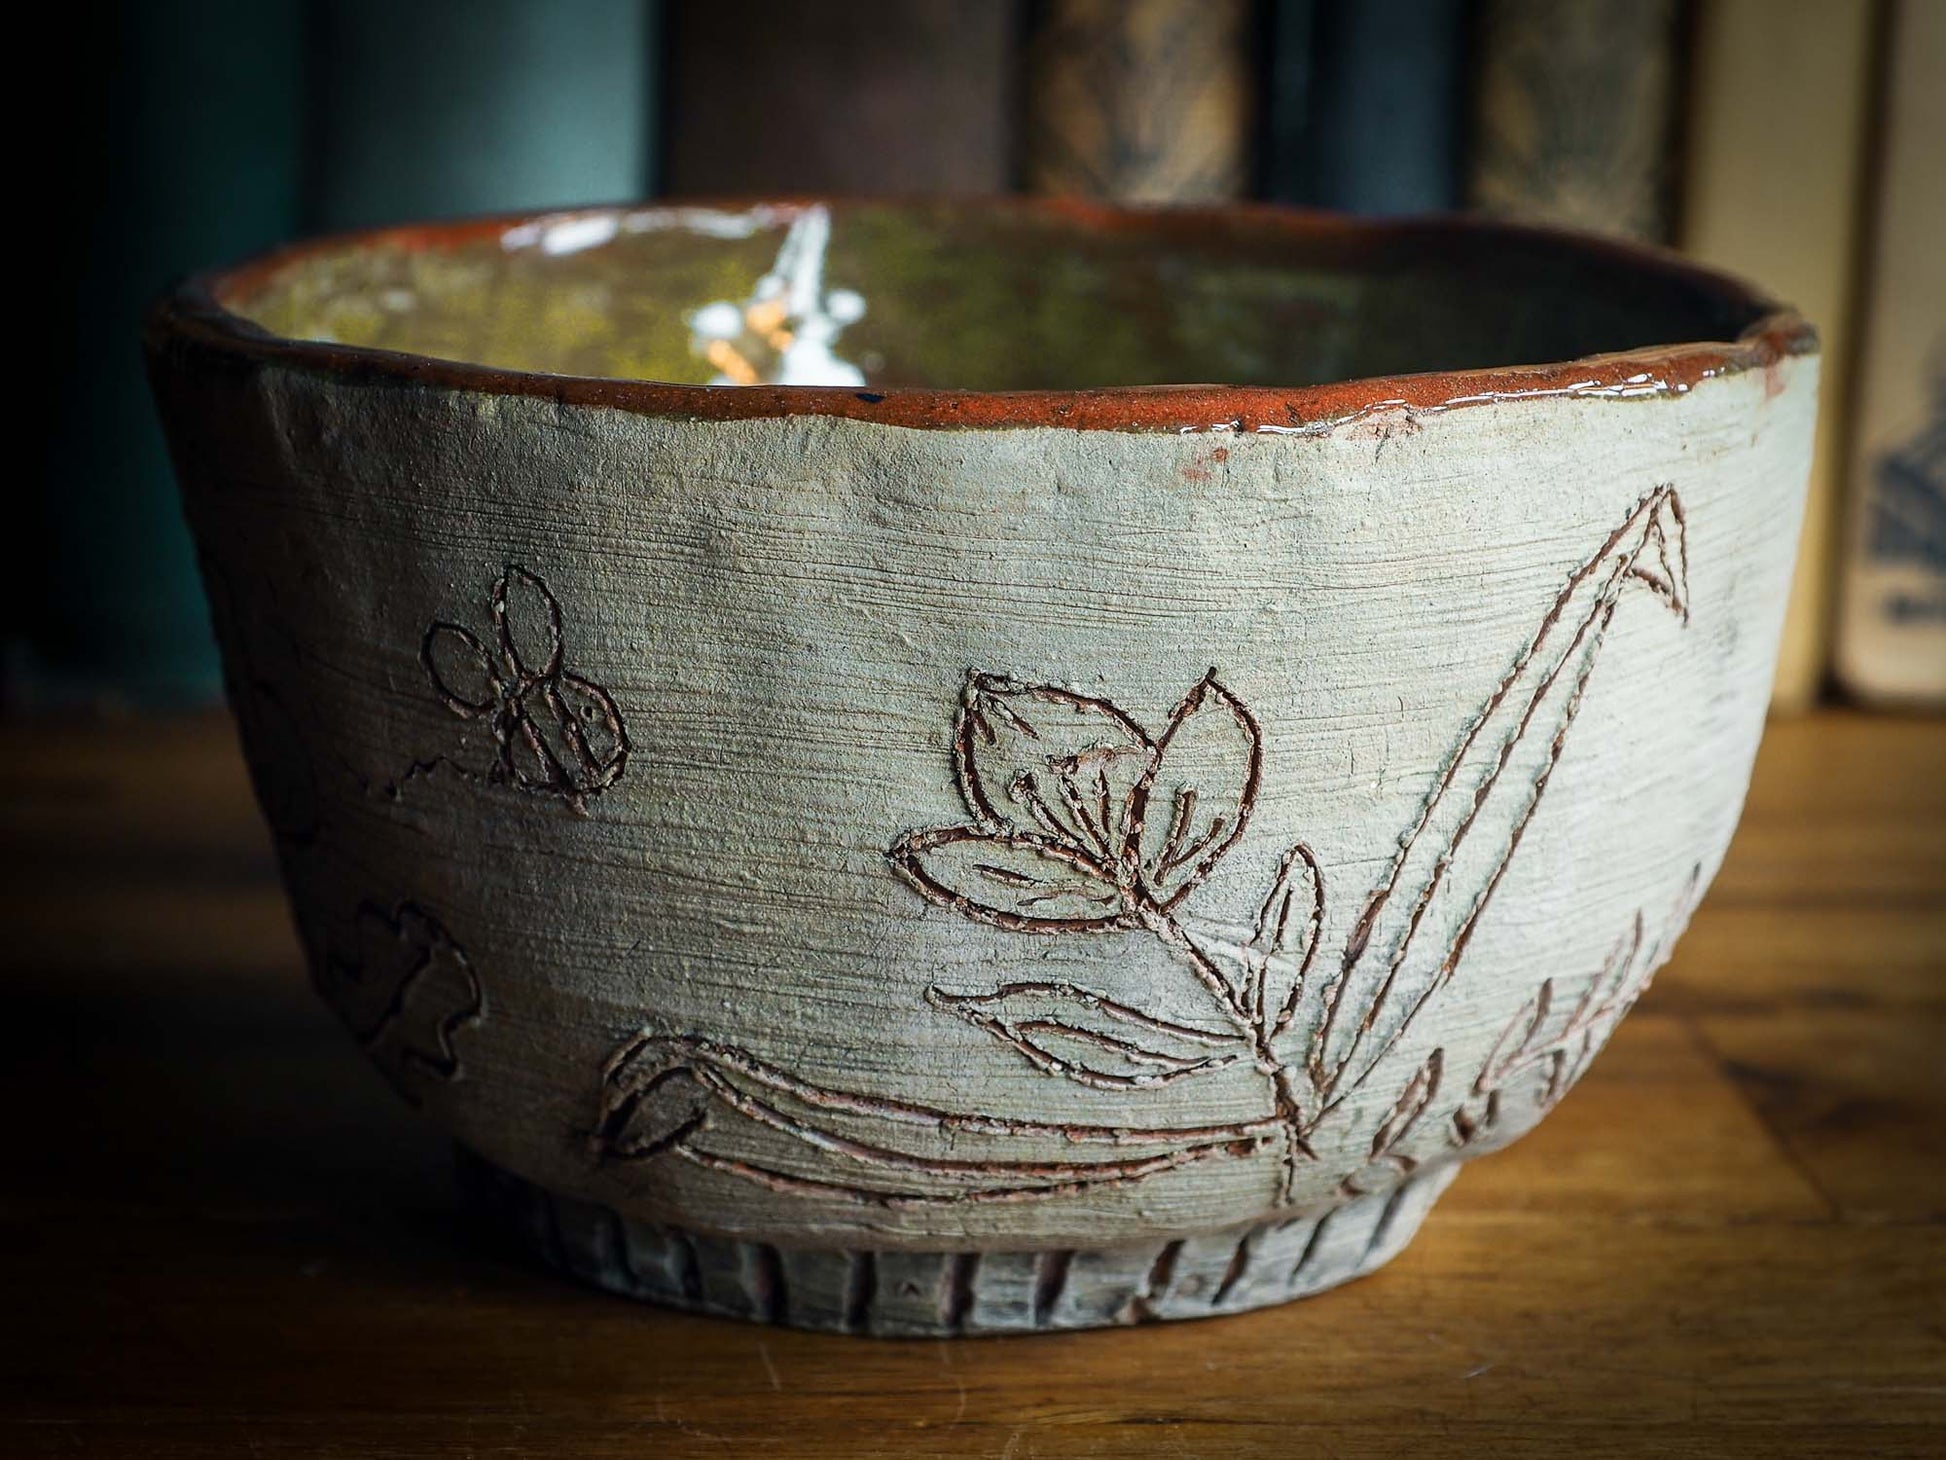 An original Idania Salcido Danita Art pinched ceramic cat pet food bowl. Handmade from locally foraged clay, this glazed ceramics one of a kind artwork is perfect for any kitchen plate and bowls unique collection. Thumbprints and  intentionally irregular shape give the bowl a cozy, warmly familiar feel when you pick it